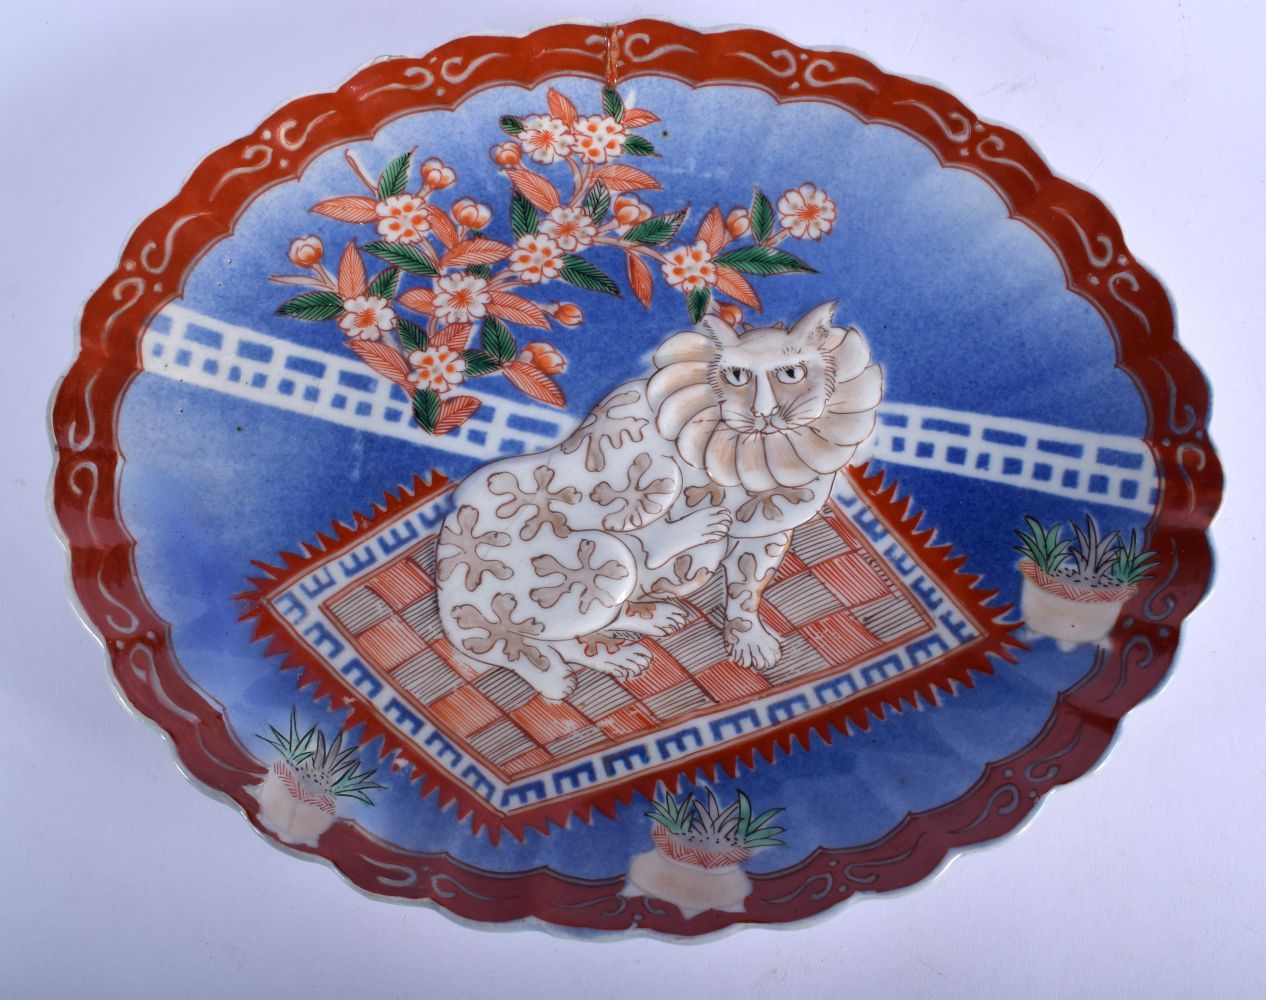 AN UNUSUAL 19TH CENTURY JAPANESE MEIJI PERIOD IMARI SCALLOPED DISH decorated with a cat. 26 cm x 22